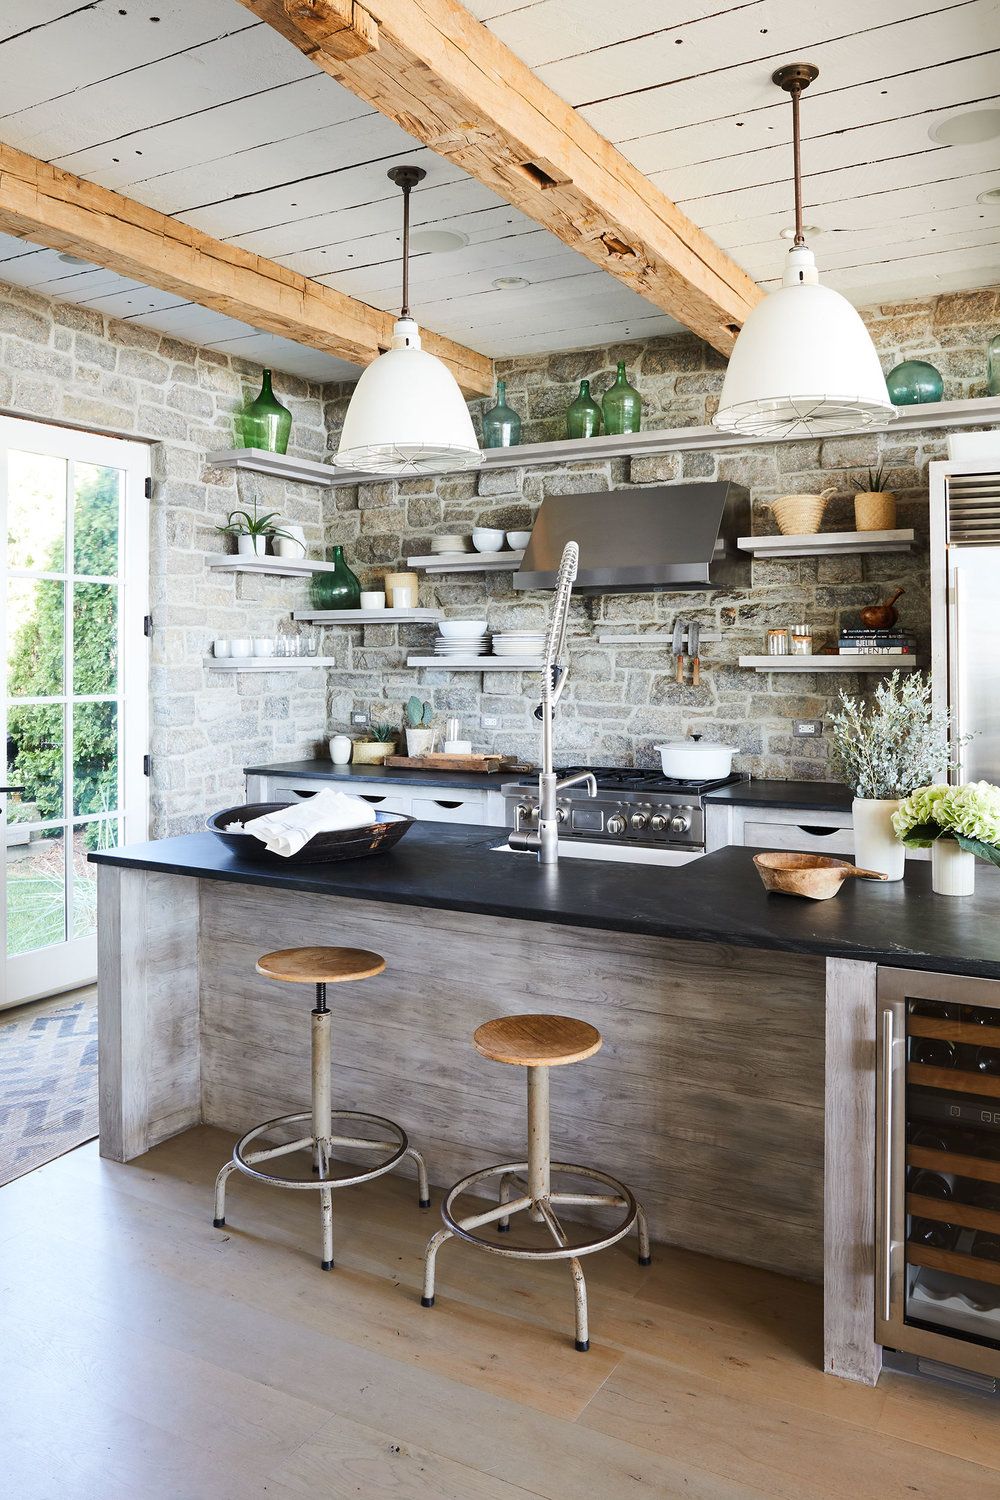 15 best rustic kitchens - modern country rustic kitchen decor ideas